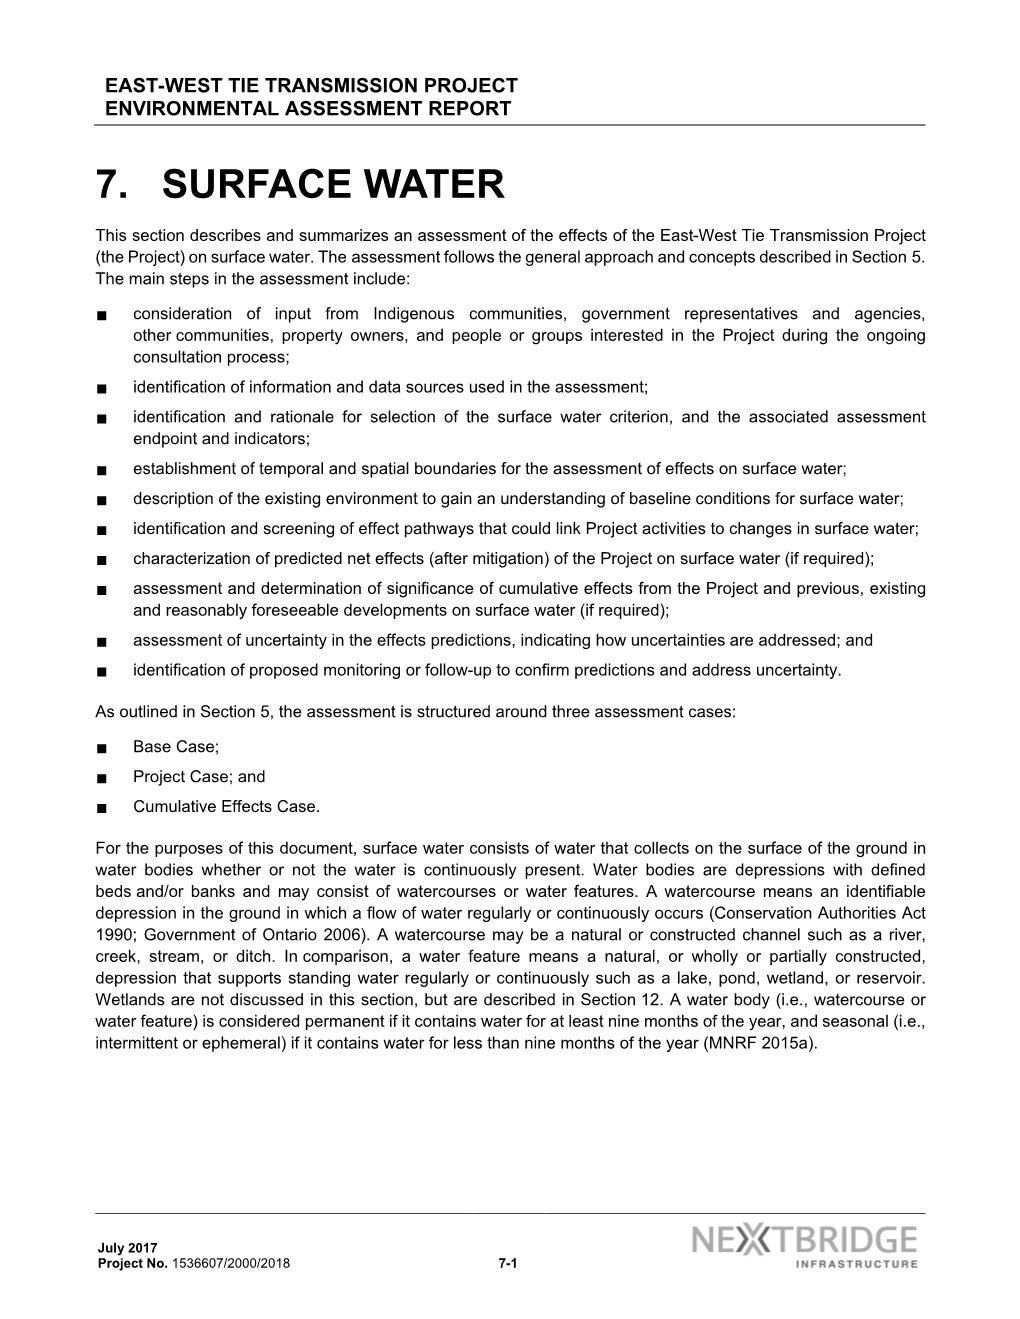 7. Surface Water